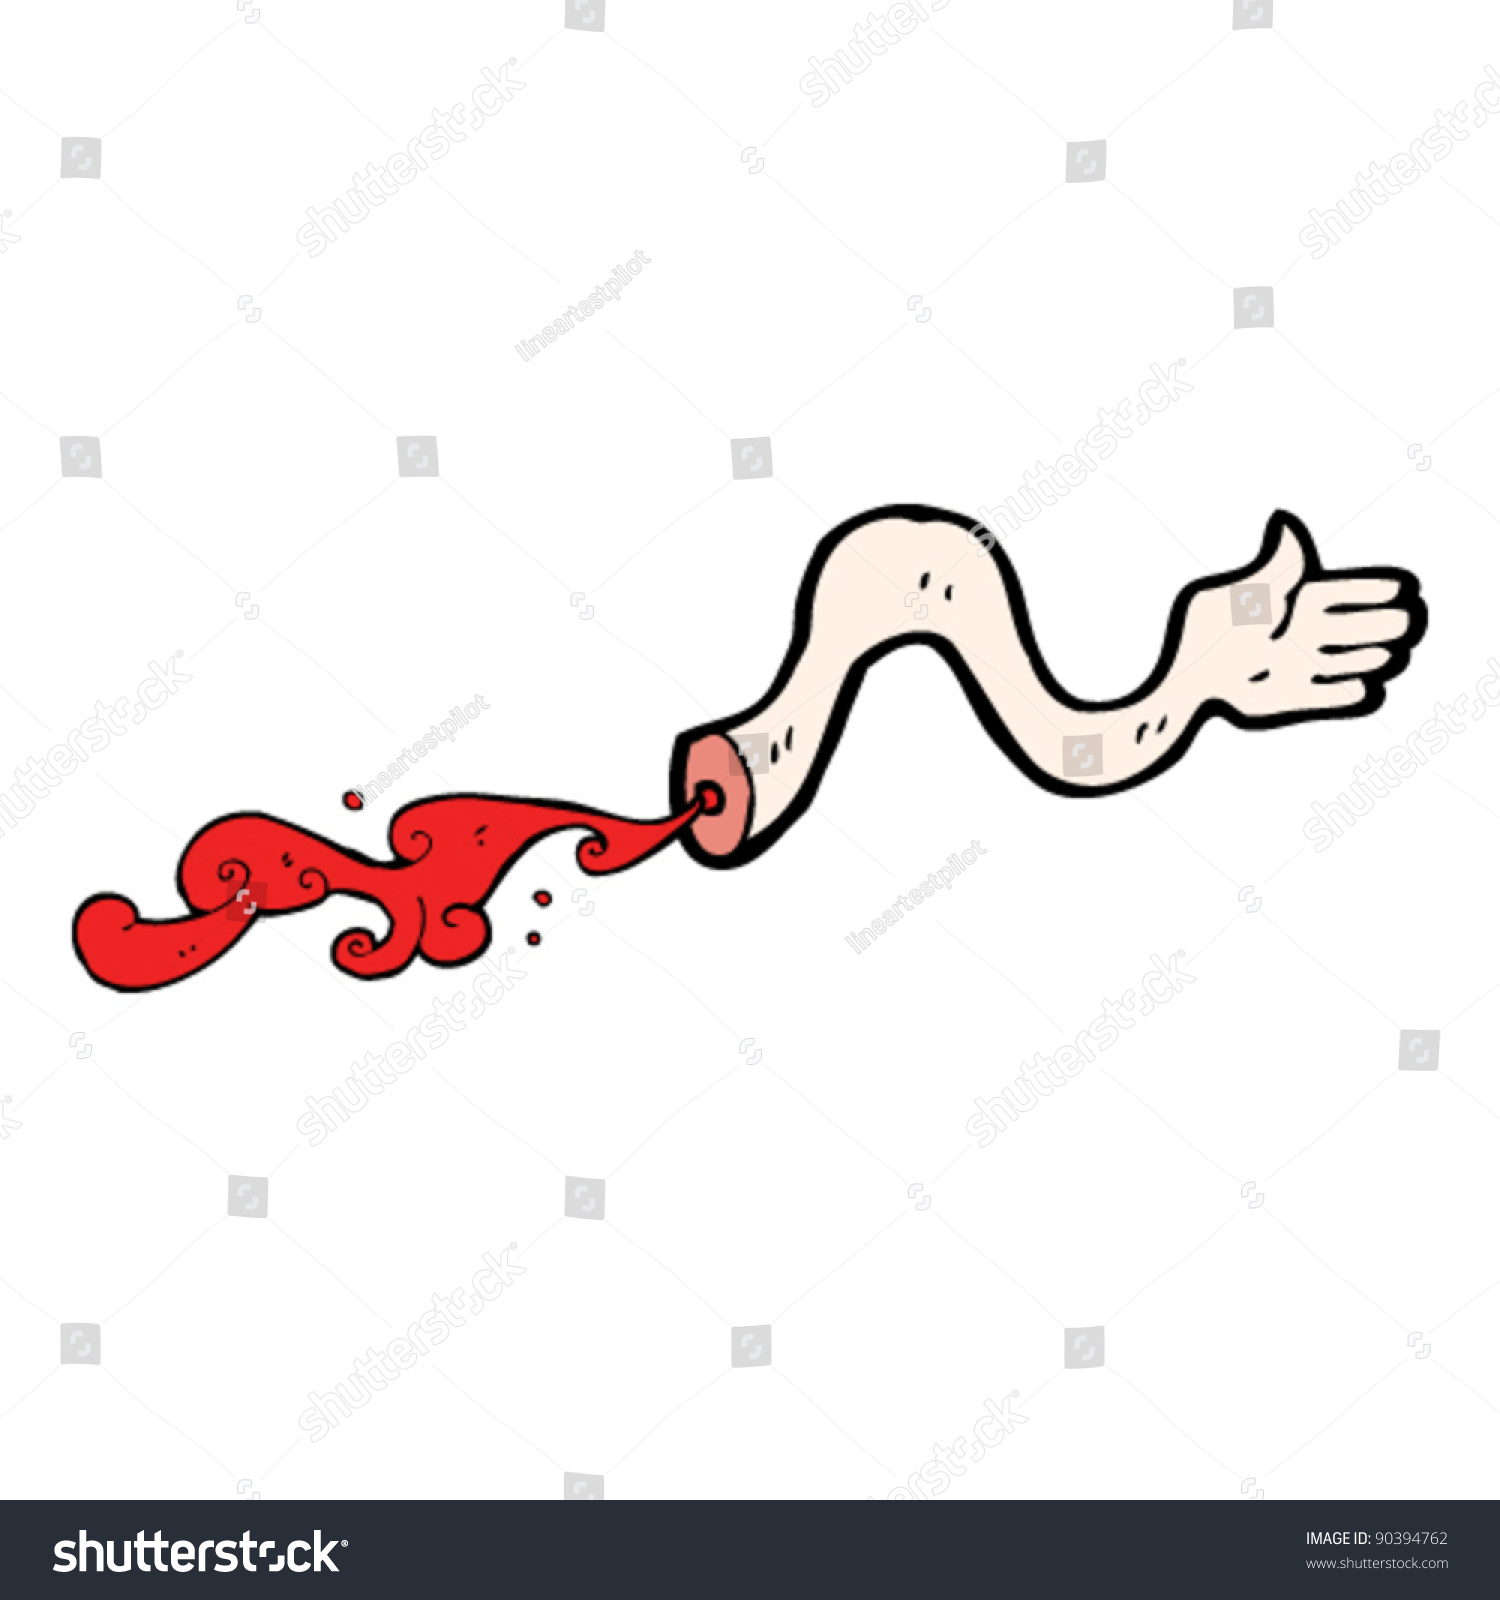 Pointing Cartoon Arm Squirting Blood Stock Vector Illustration 90394762